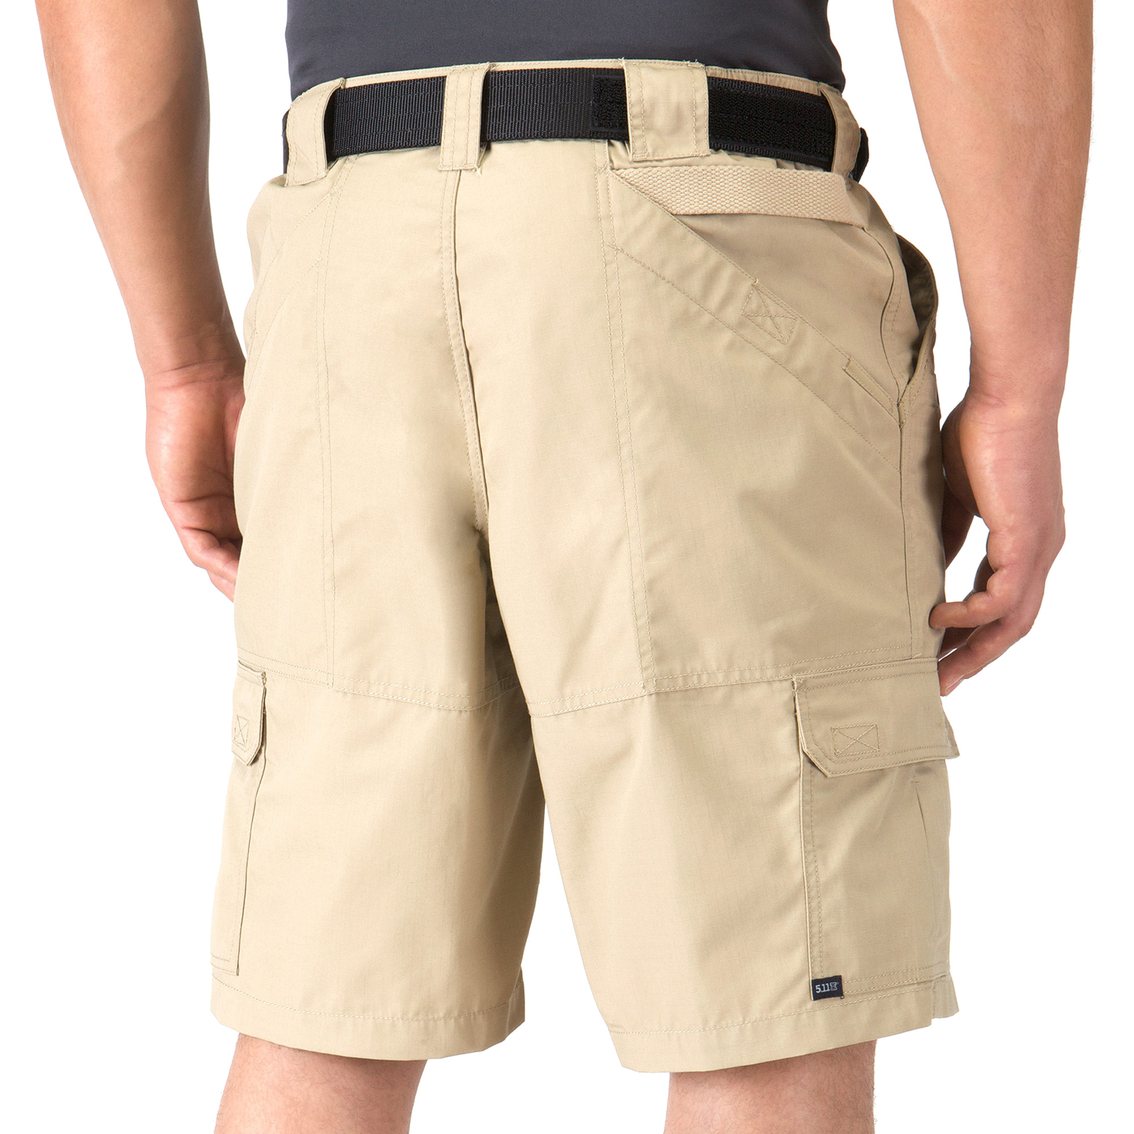 5.11 Taclite Pro 11 in. Shorts - Image 2 of 3